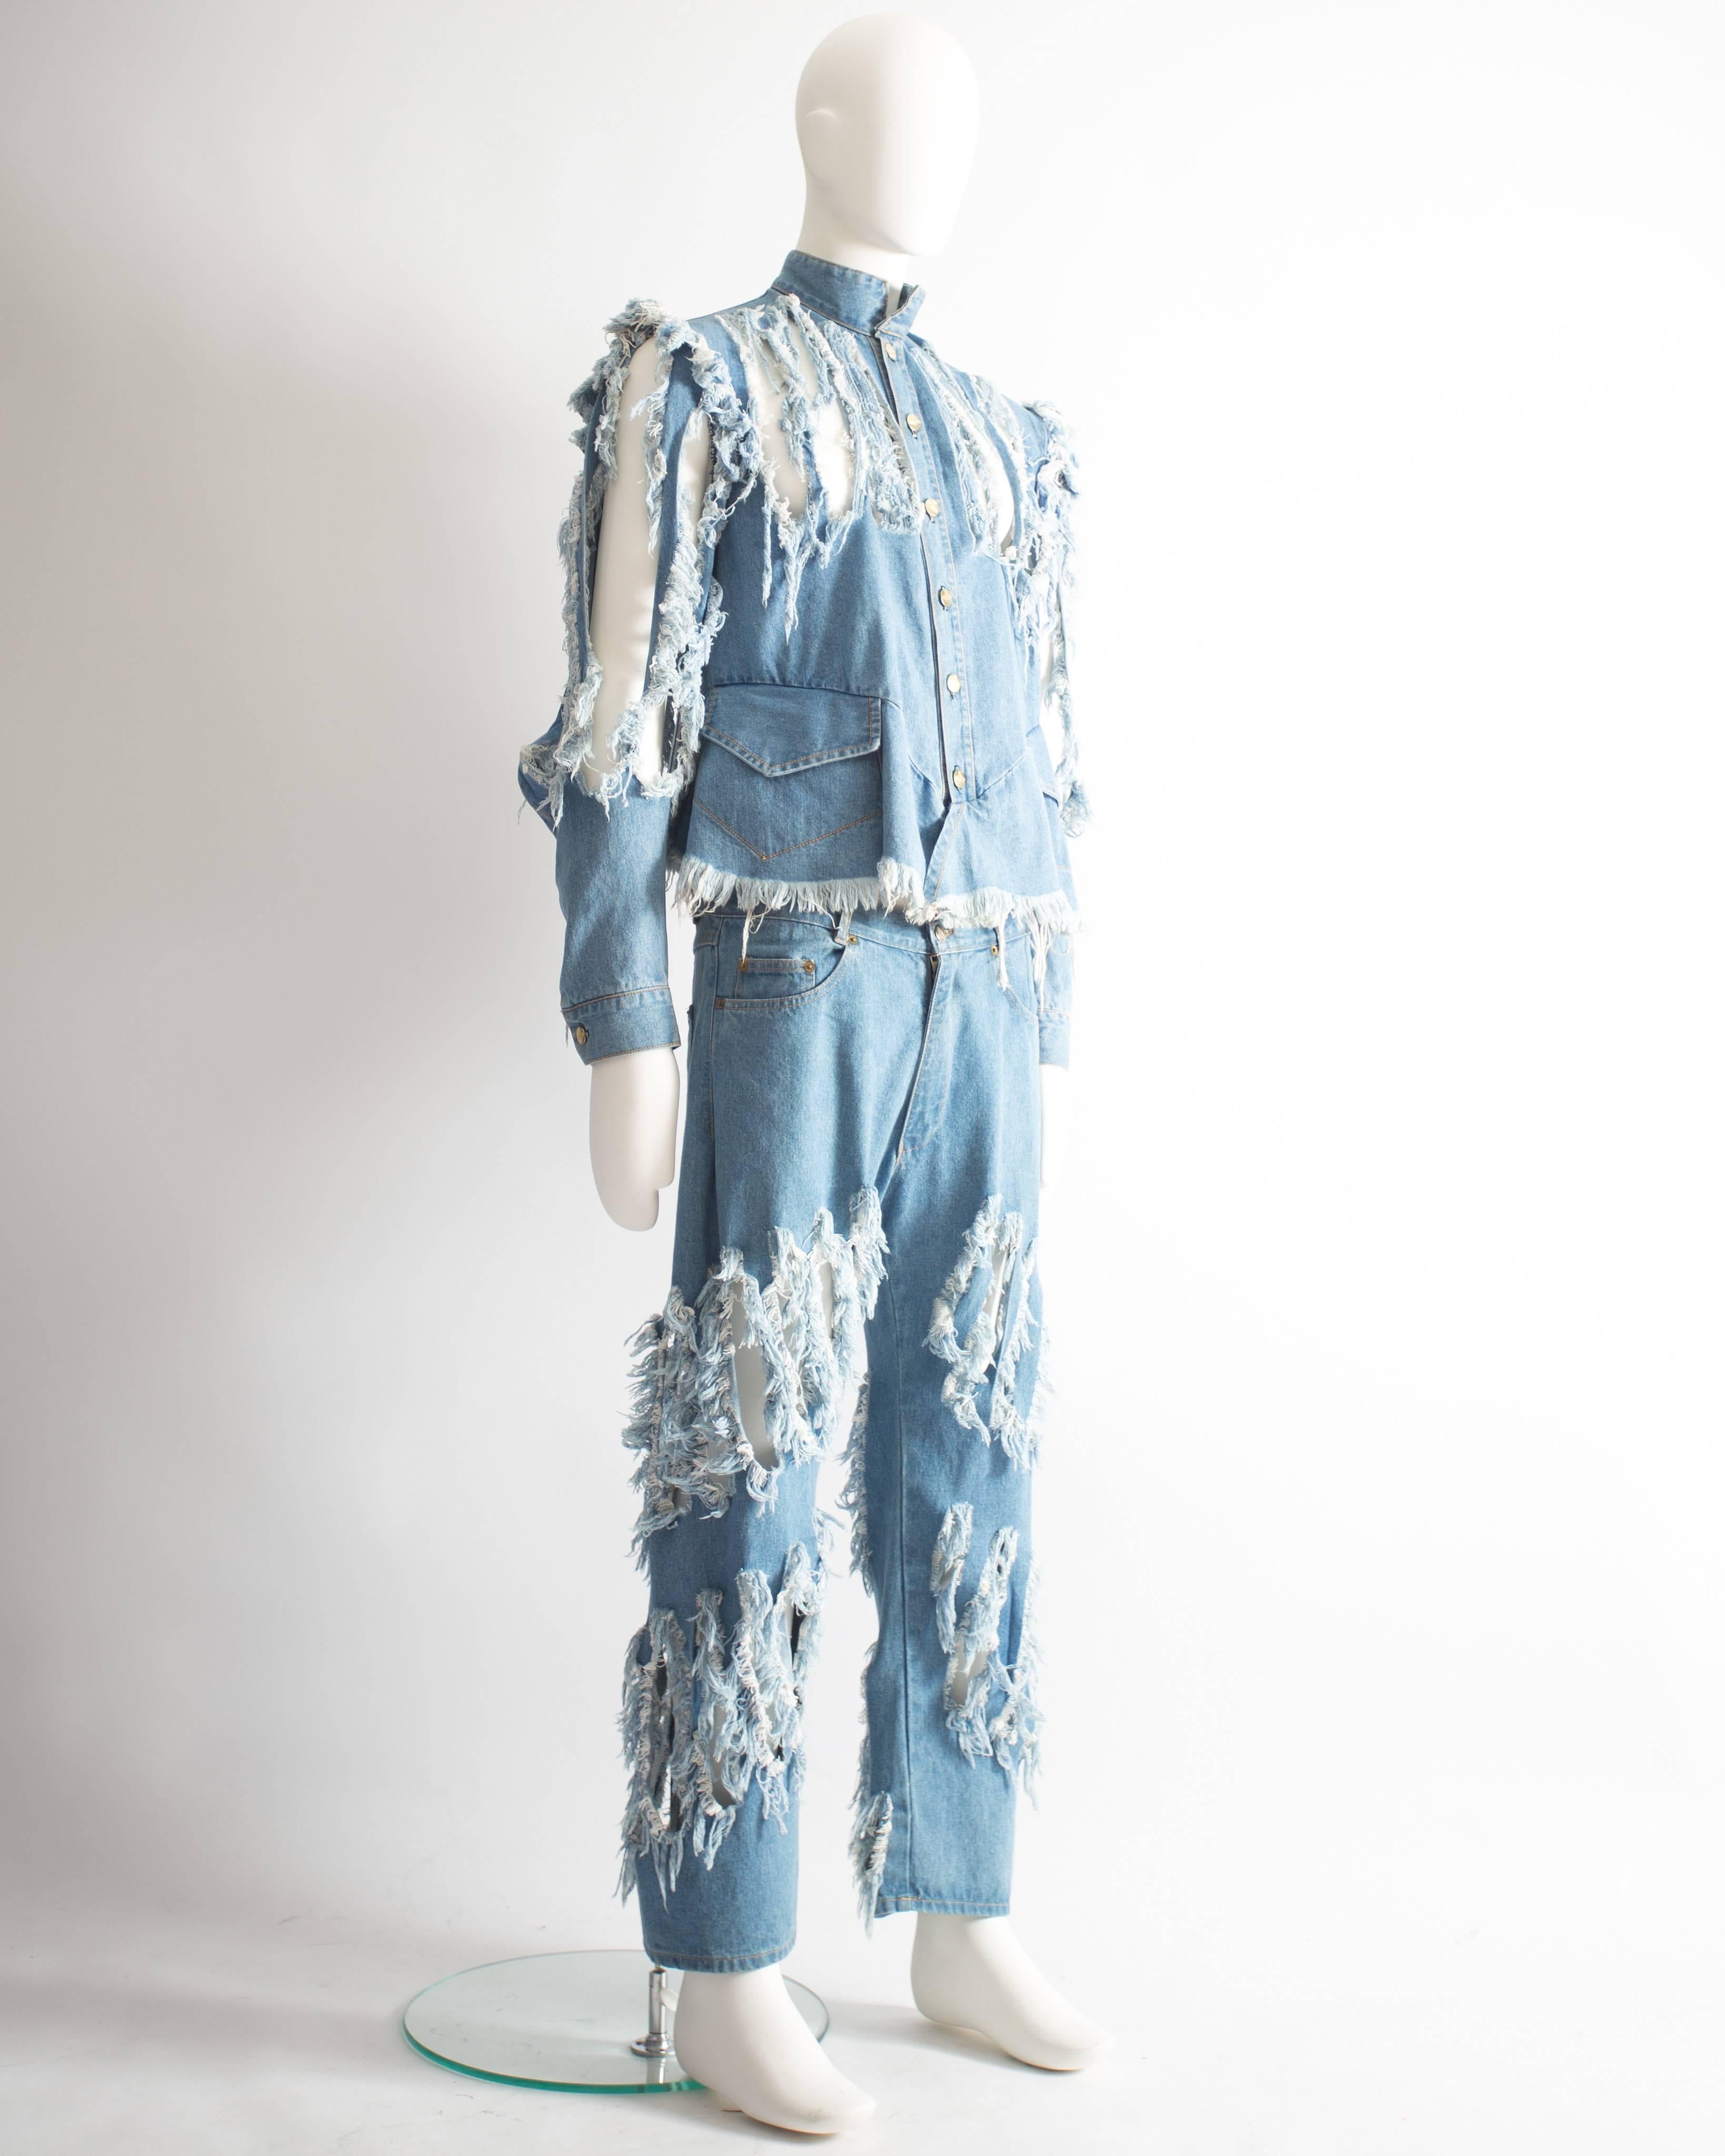 vivienne westwood ensemble from the “cut and slash” collection